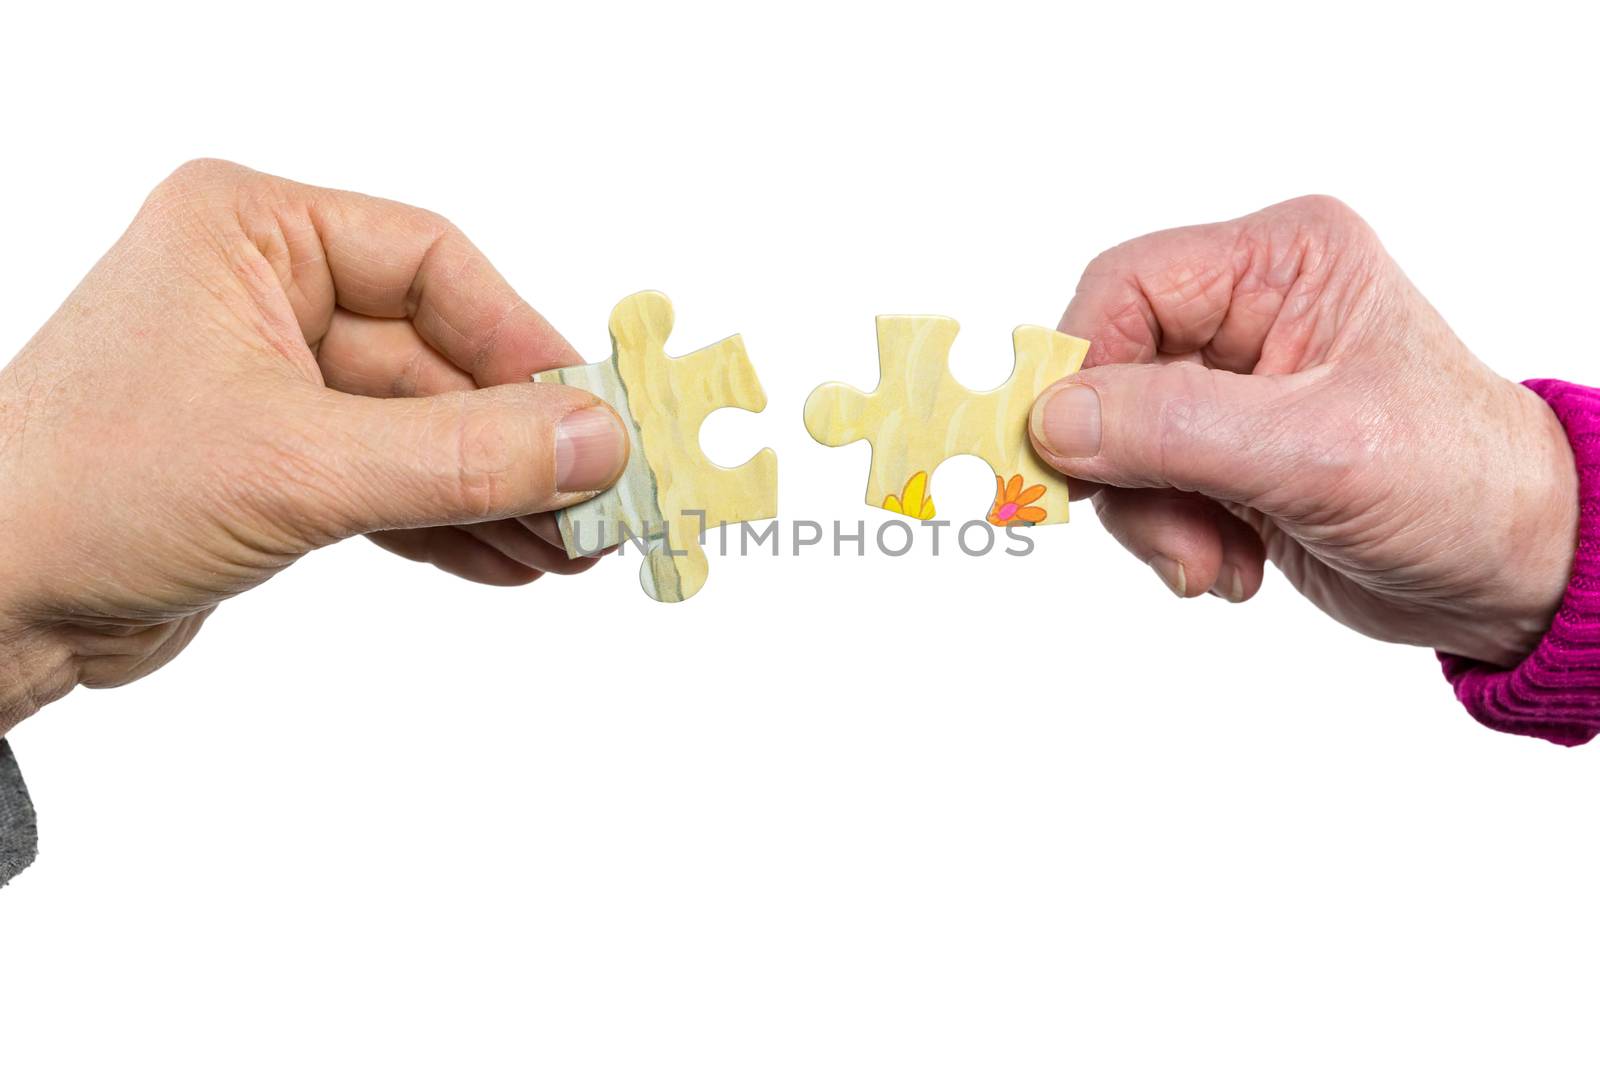 Two hands uniting fitting puzzle pieces by BenSchonewille